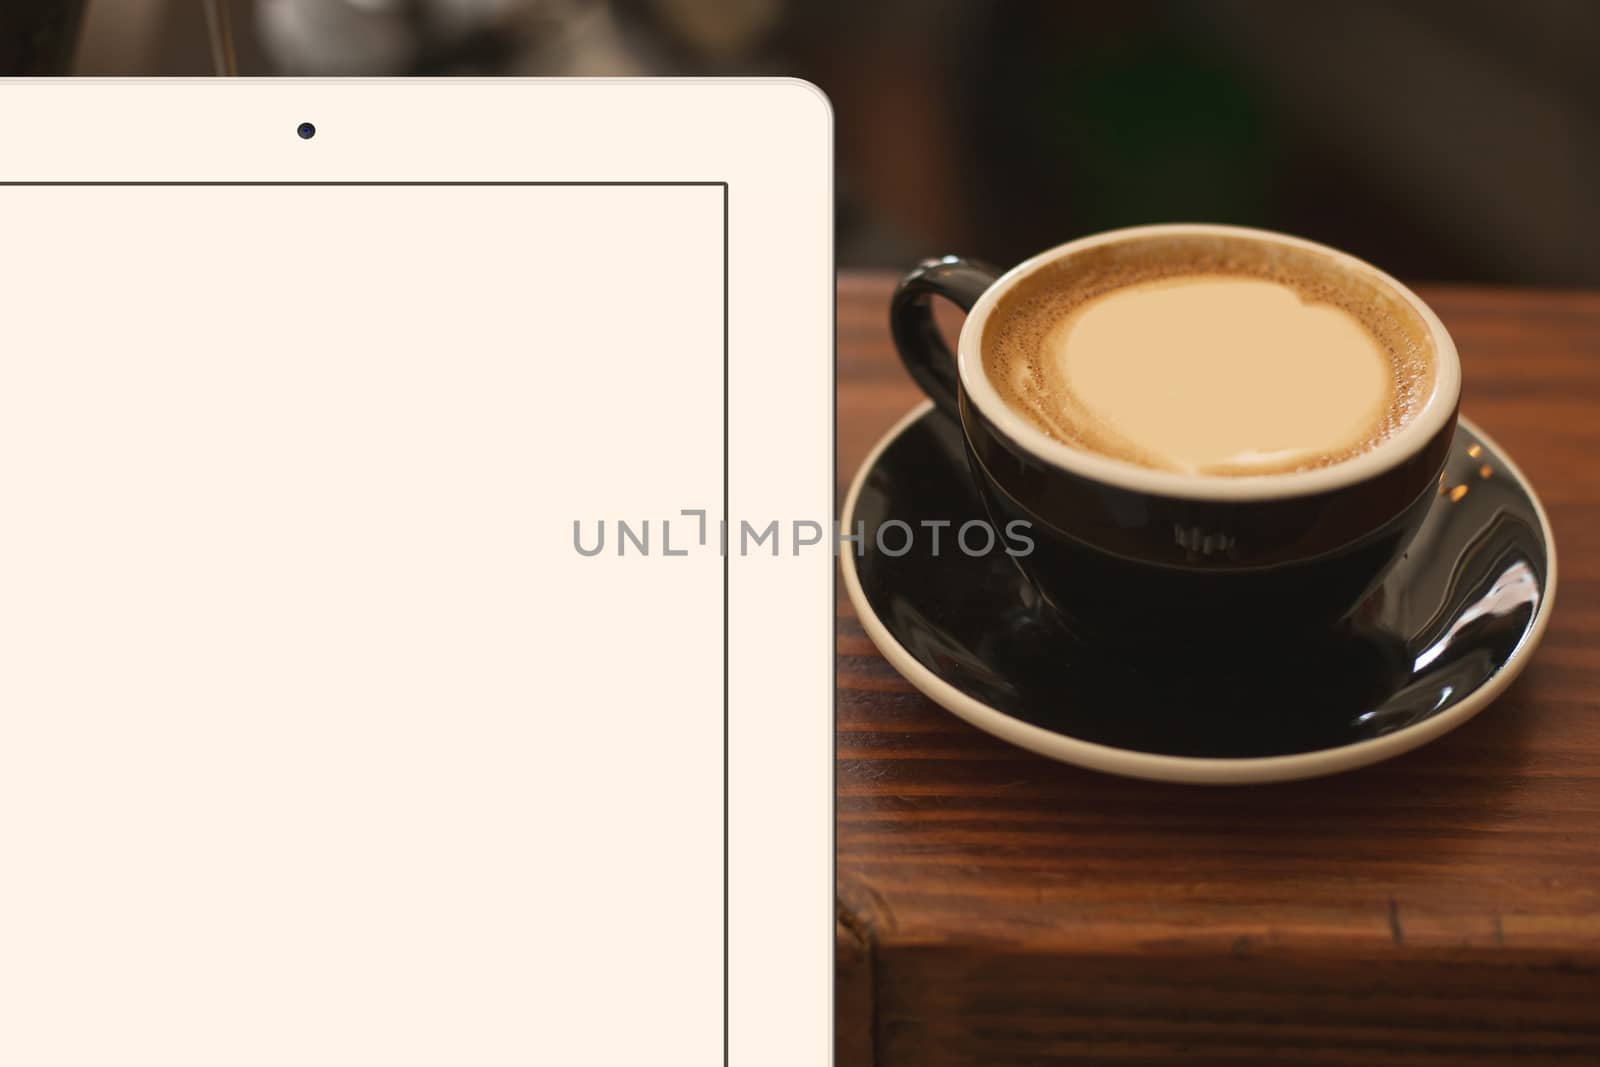 a cup of coffee and tablet in the foreground